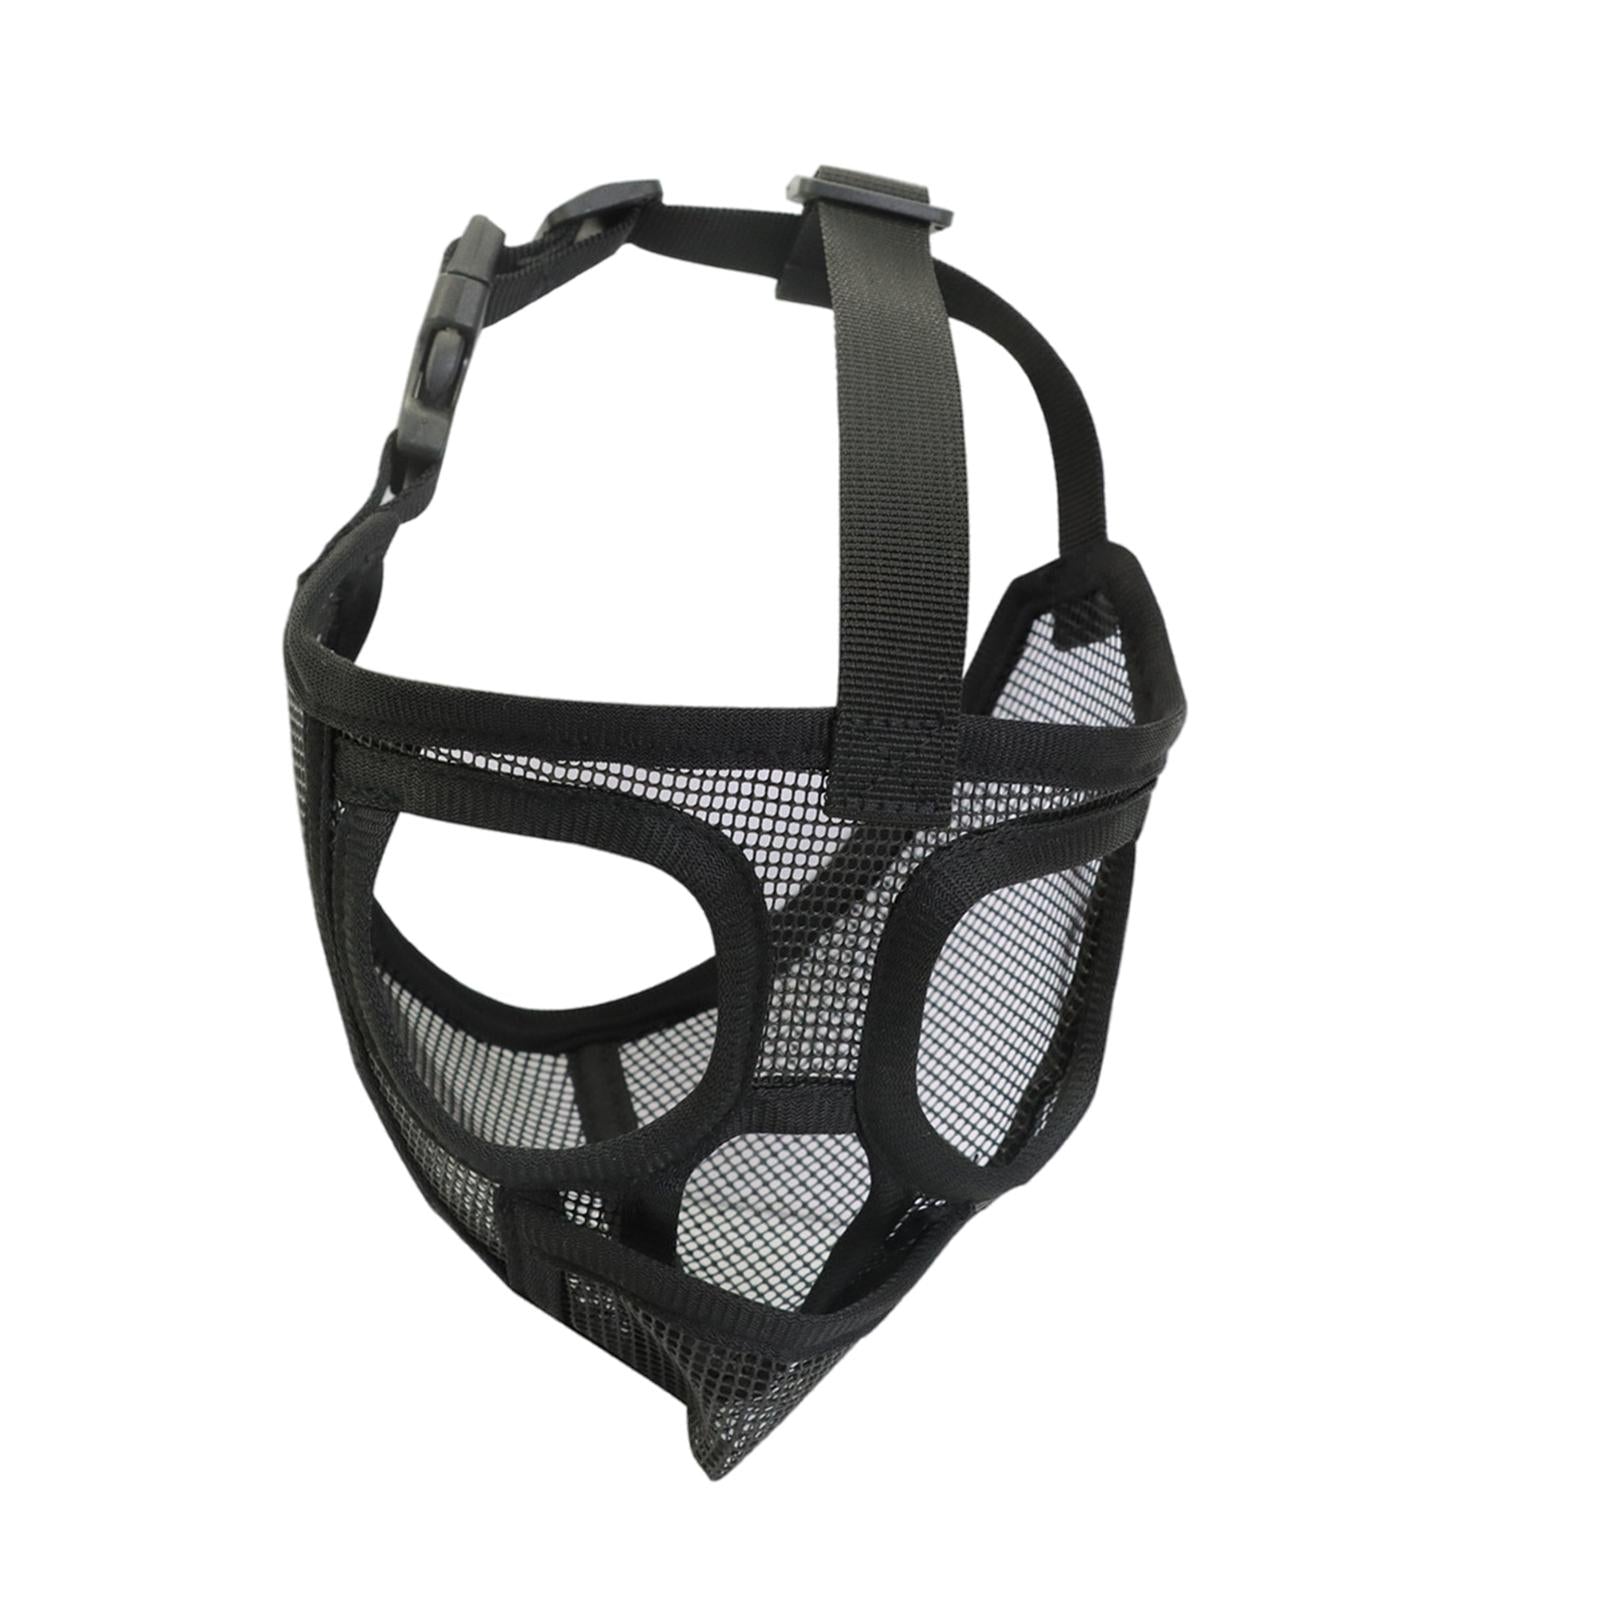 Adjustable Pet Dog Mask Anti Bark Bite Chewing Mesh Mouth Muzzle Grooming Tongue Out Black S